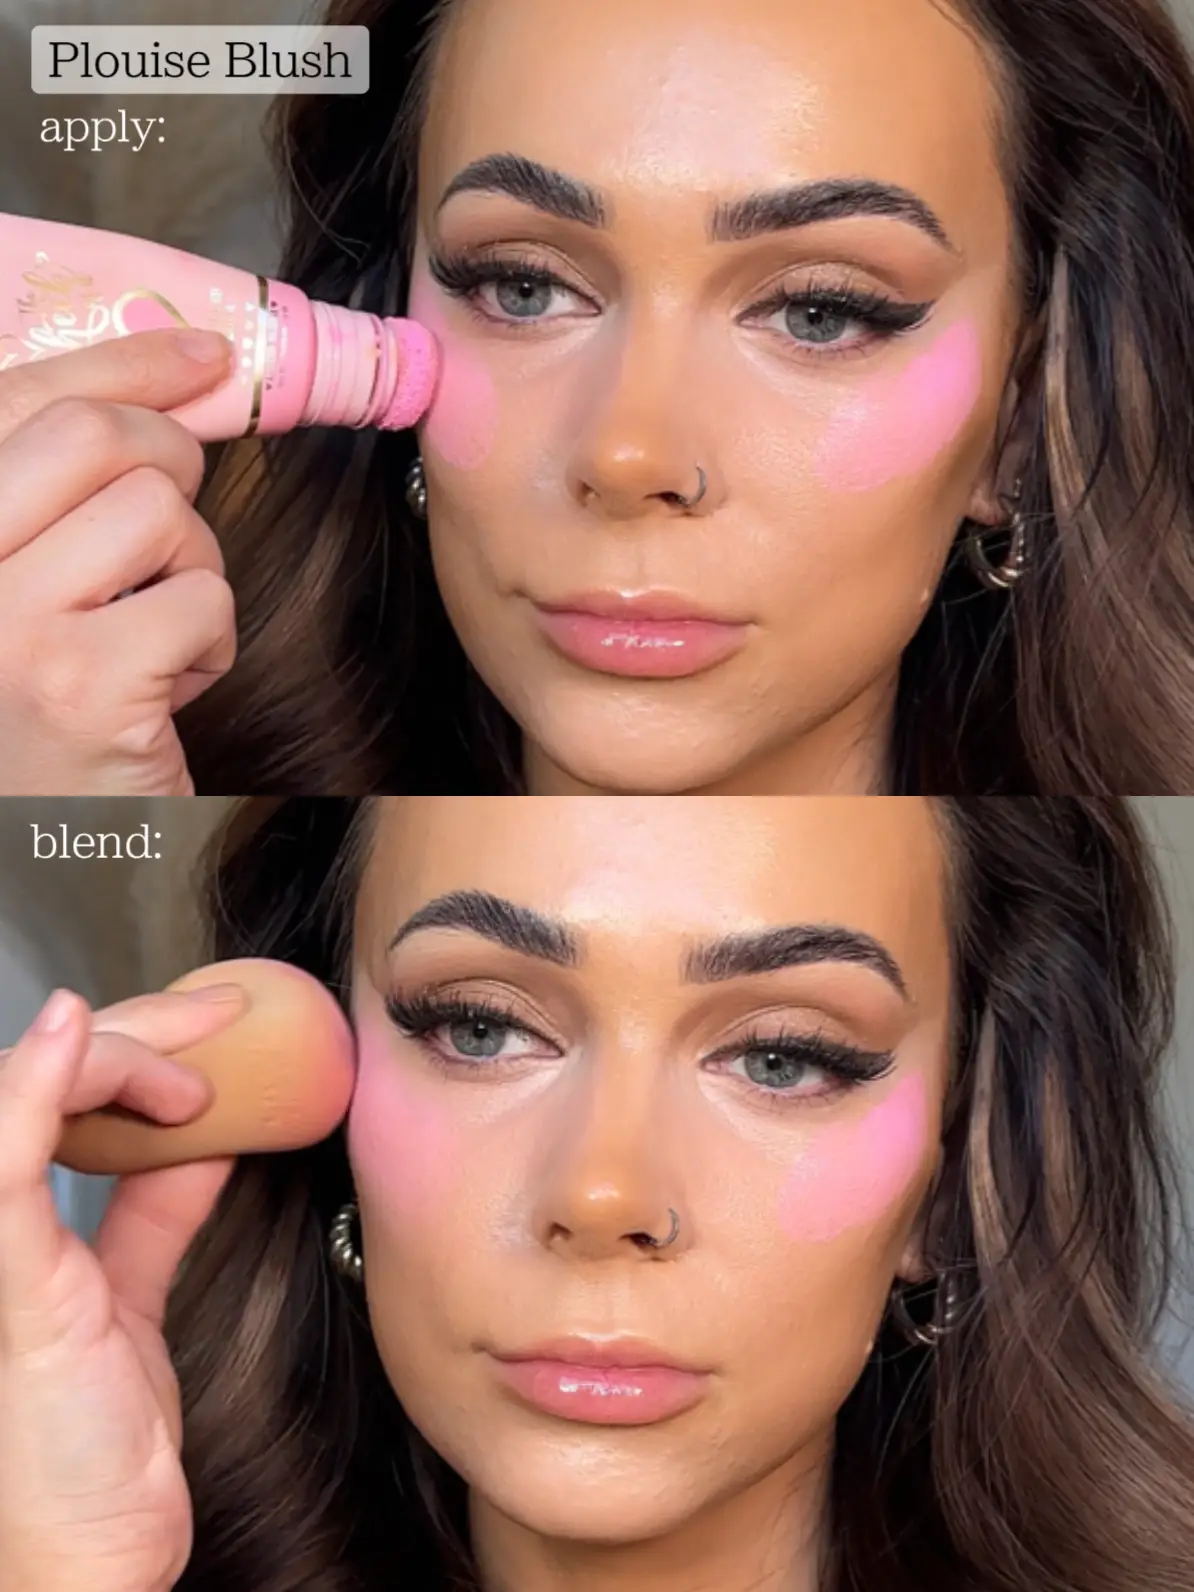 Plouisemakeupacademy the cheek of it in 'legally pink' if anyones won, pink under eye